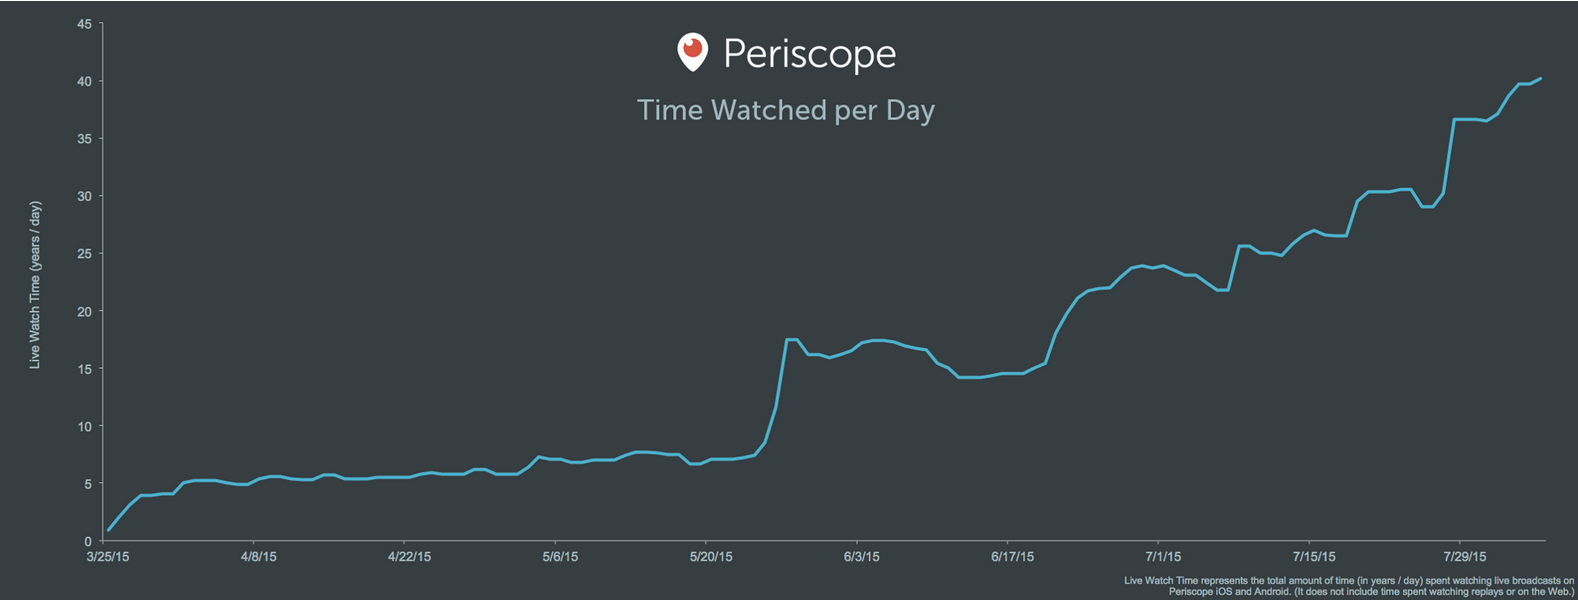 Live Streaming on Social Media, The Savvy Marketers Guide to Greatness - Periscope views